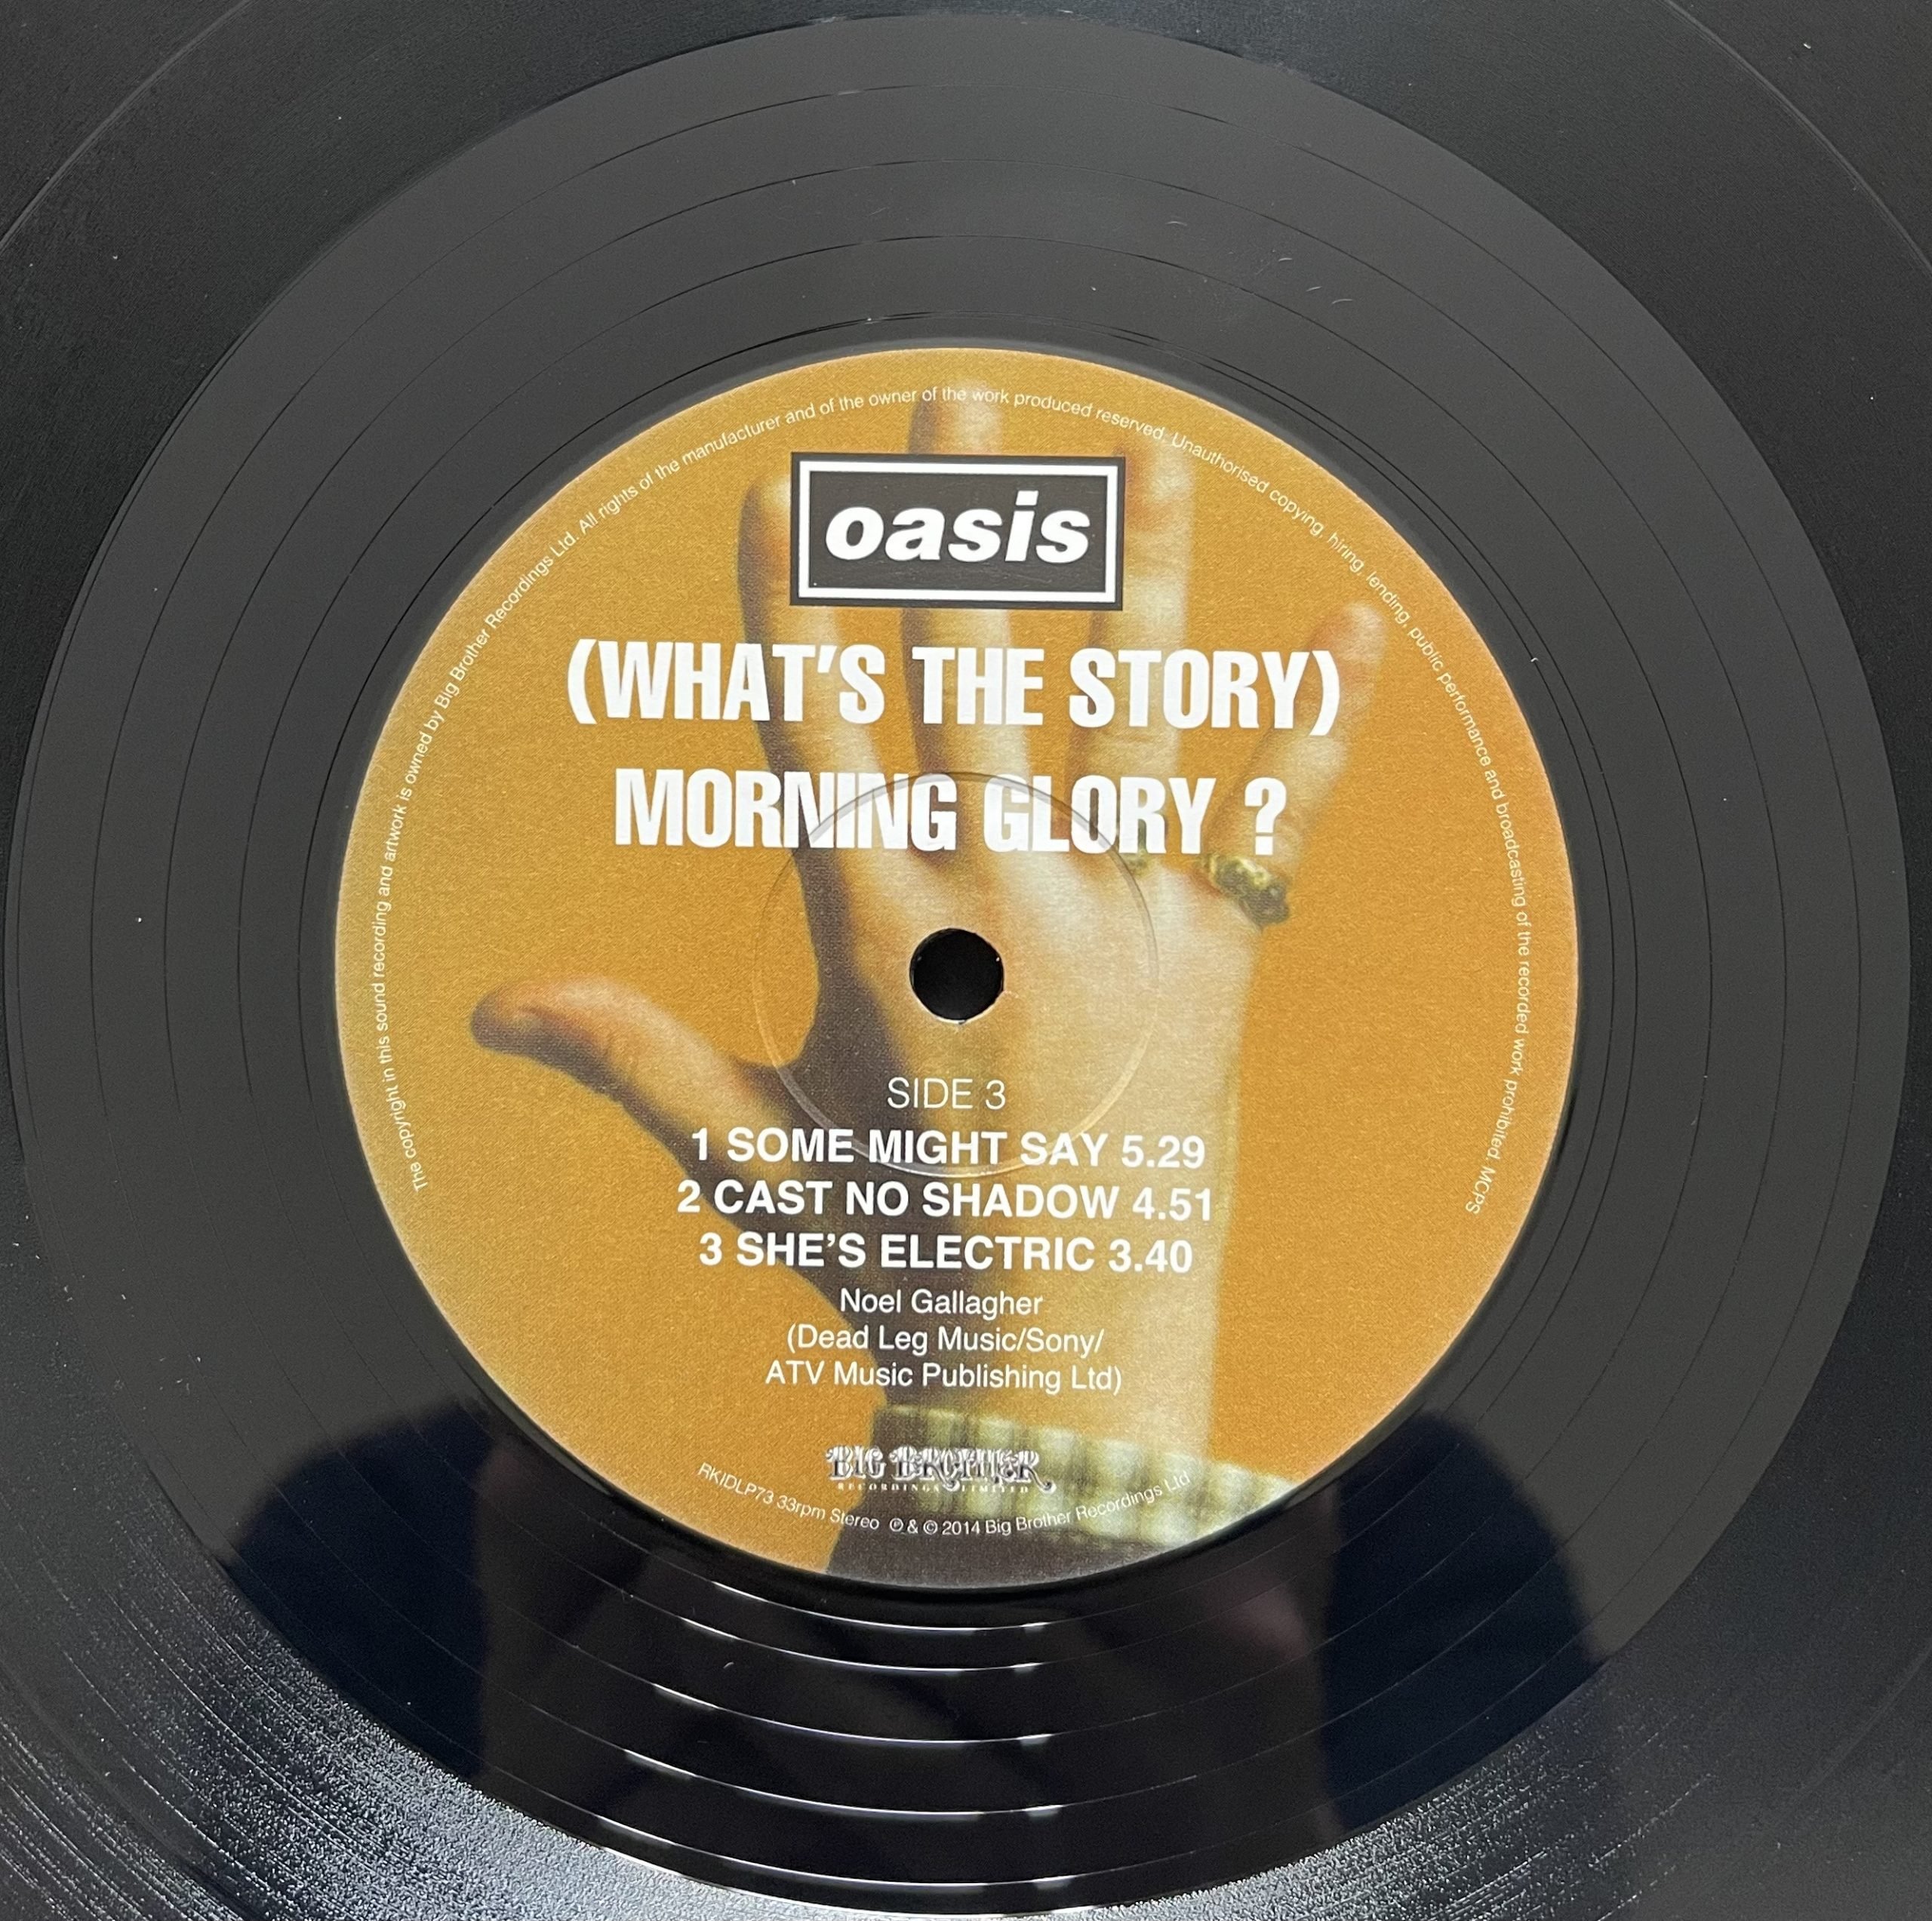 Oasis – (What's The Story) Morning Glory? | VinylSelector.com